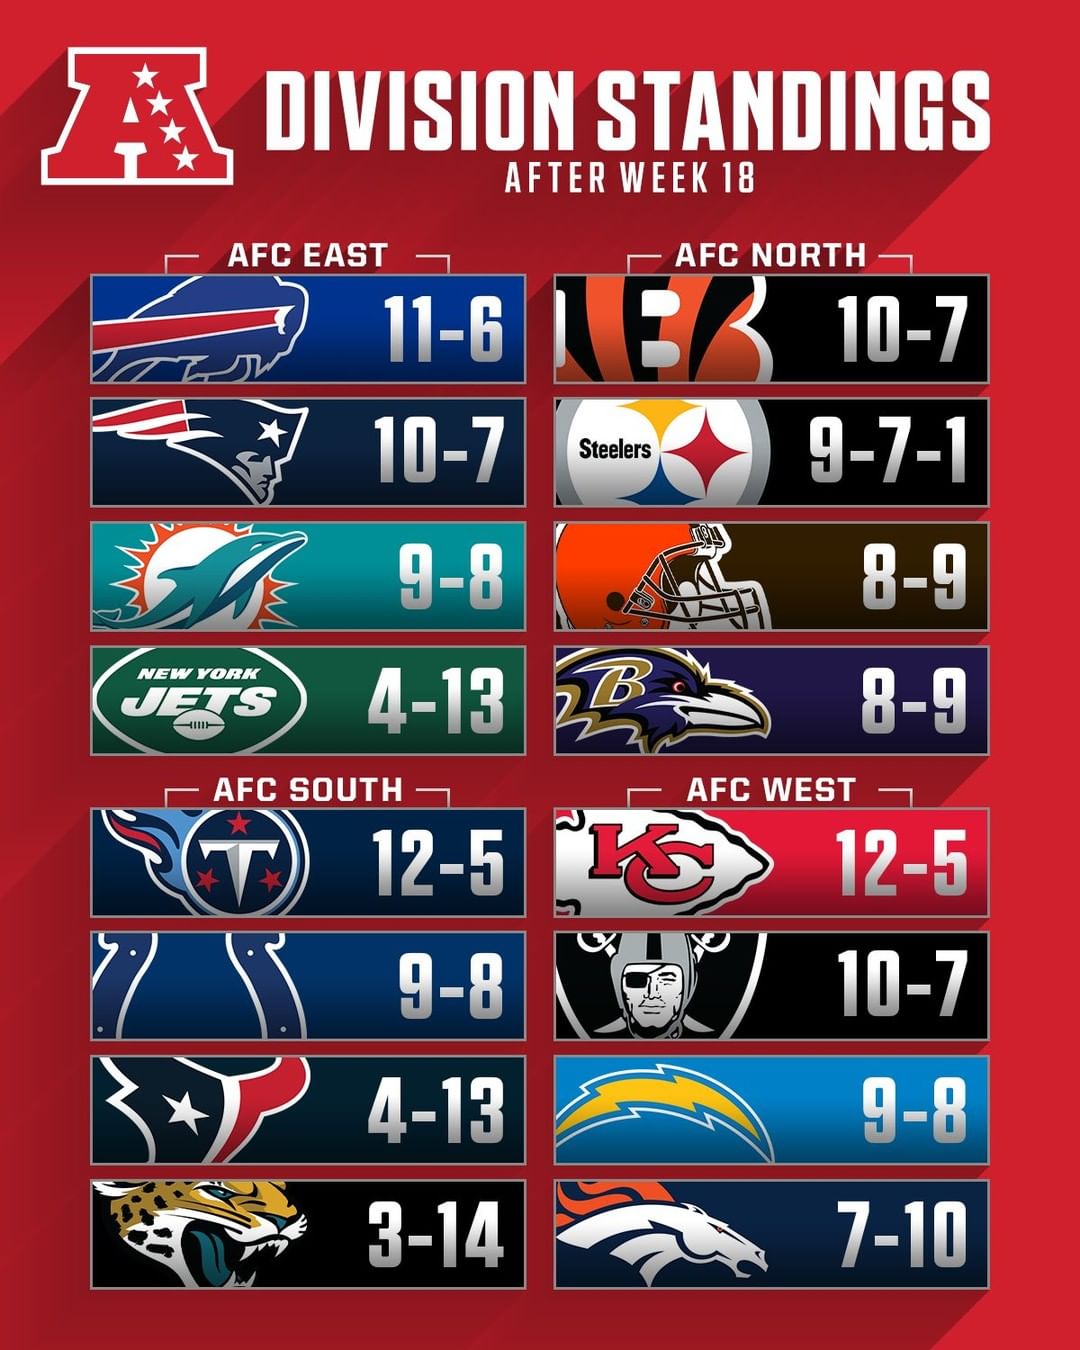 Where did your favorite team end up in the final standings?...